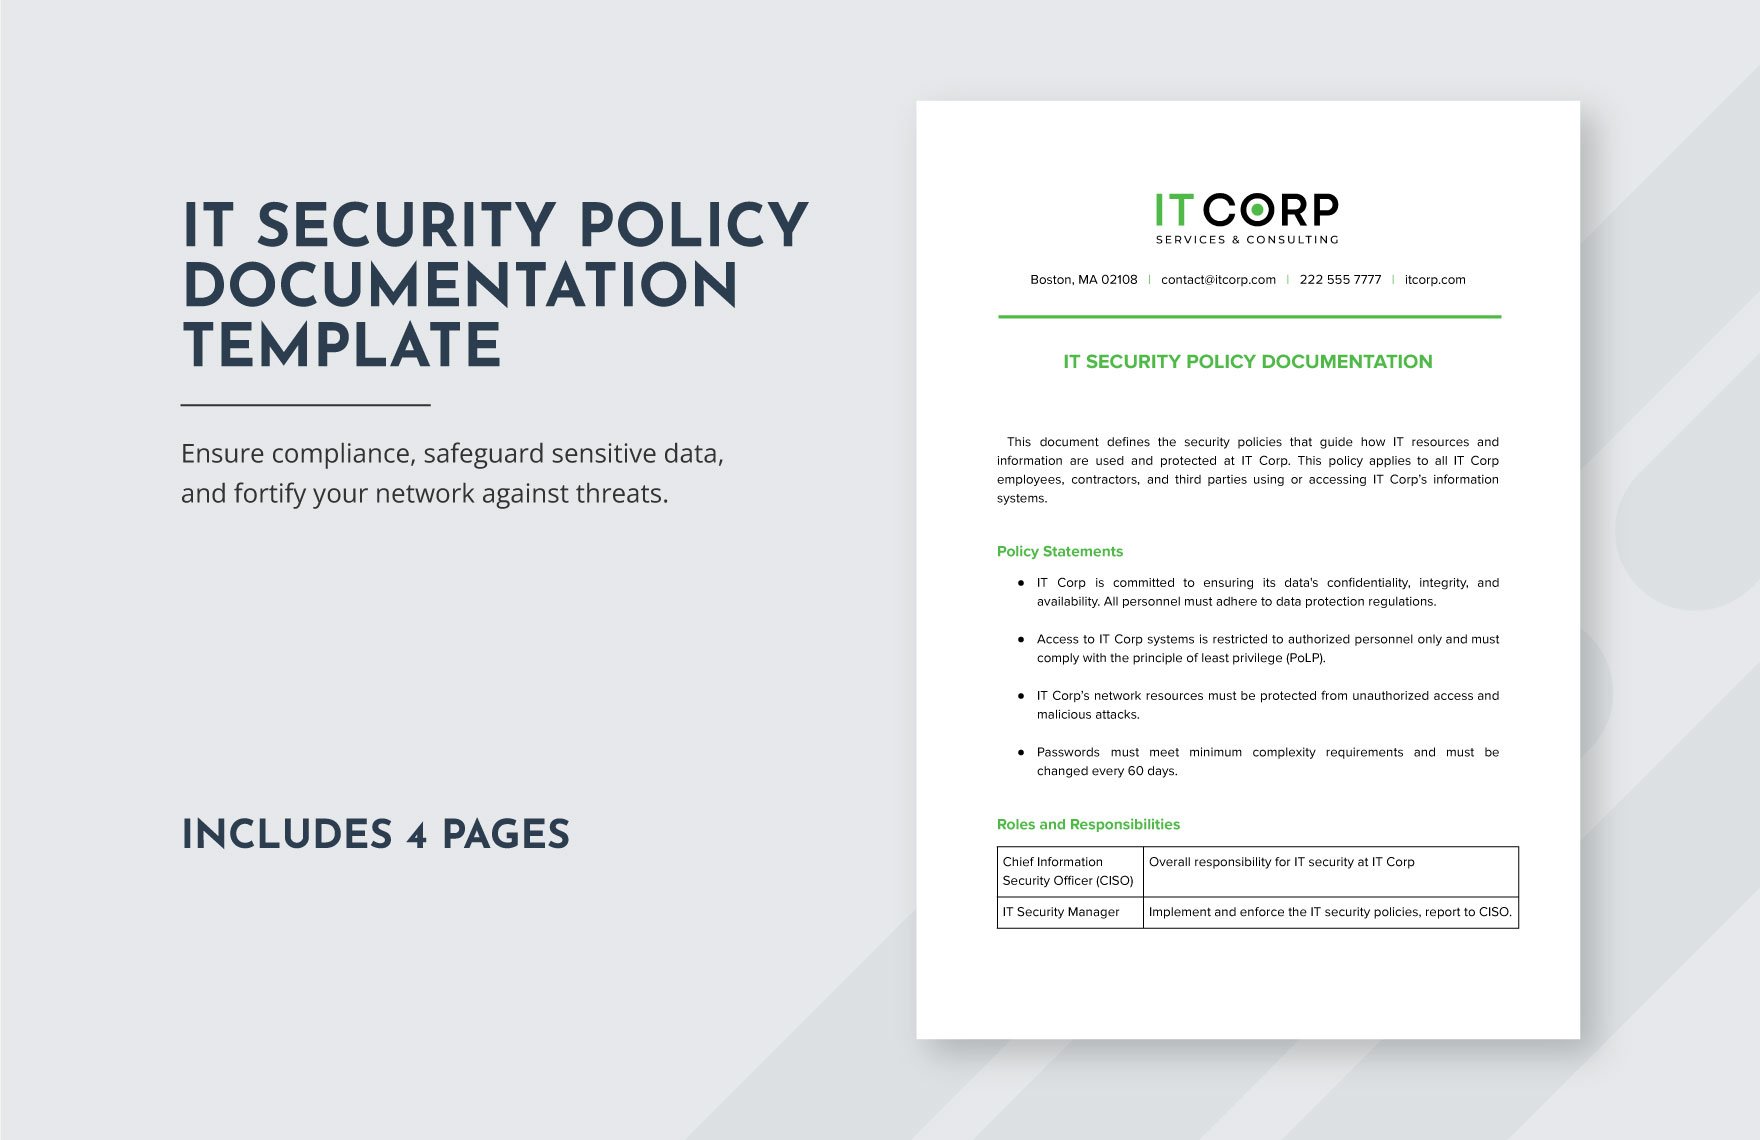 IT Security Policy Documentation Template in Word, Google Docs, PDF